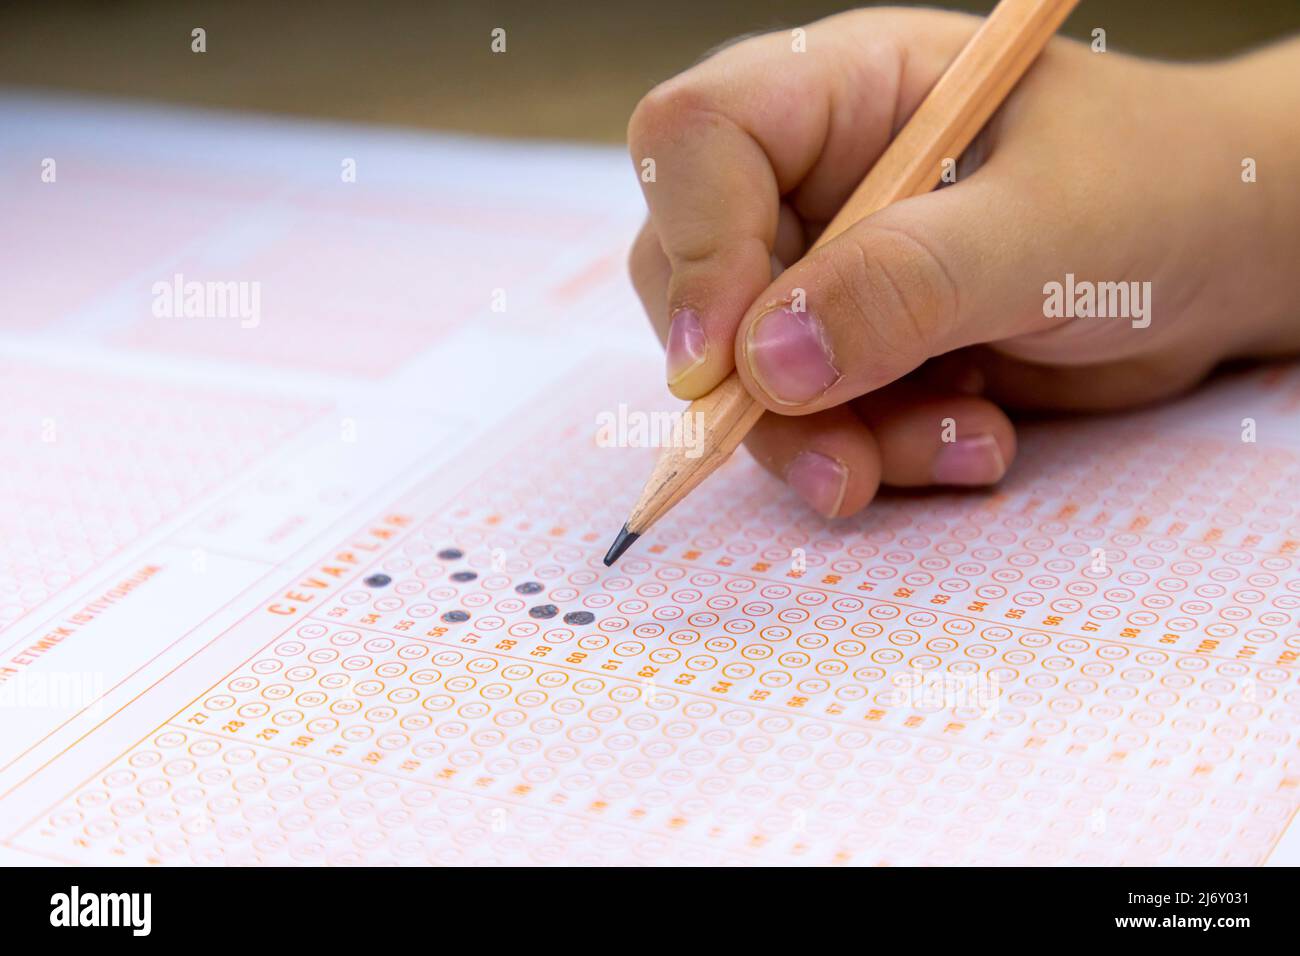 Test score sheet with answers Stock Photo